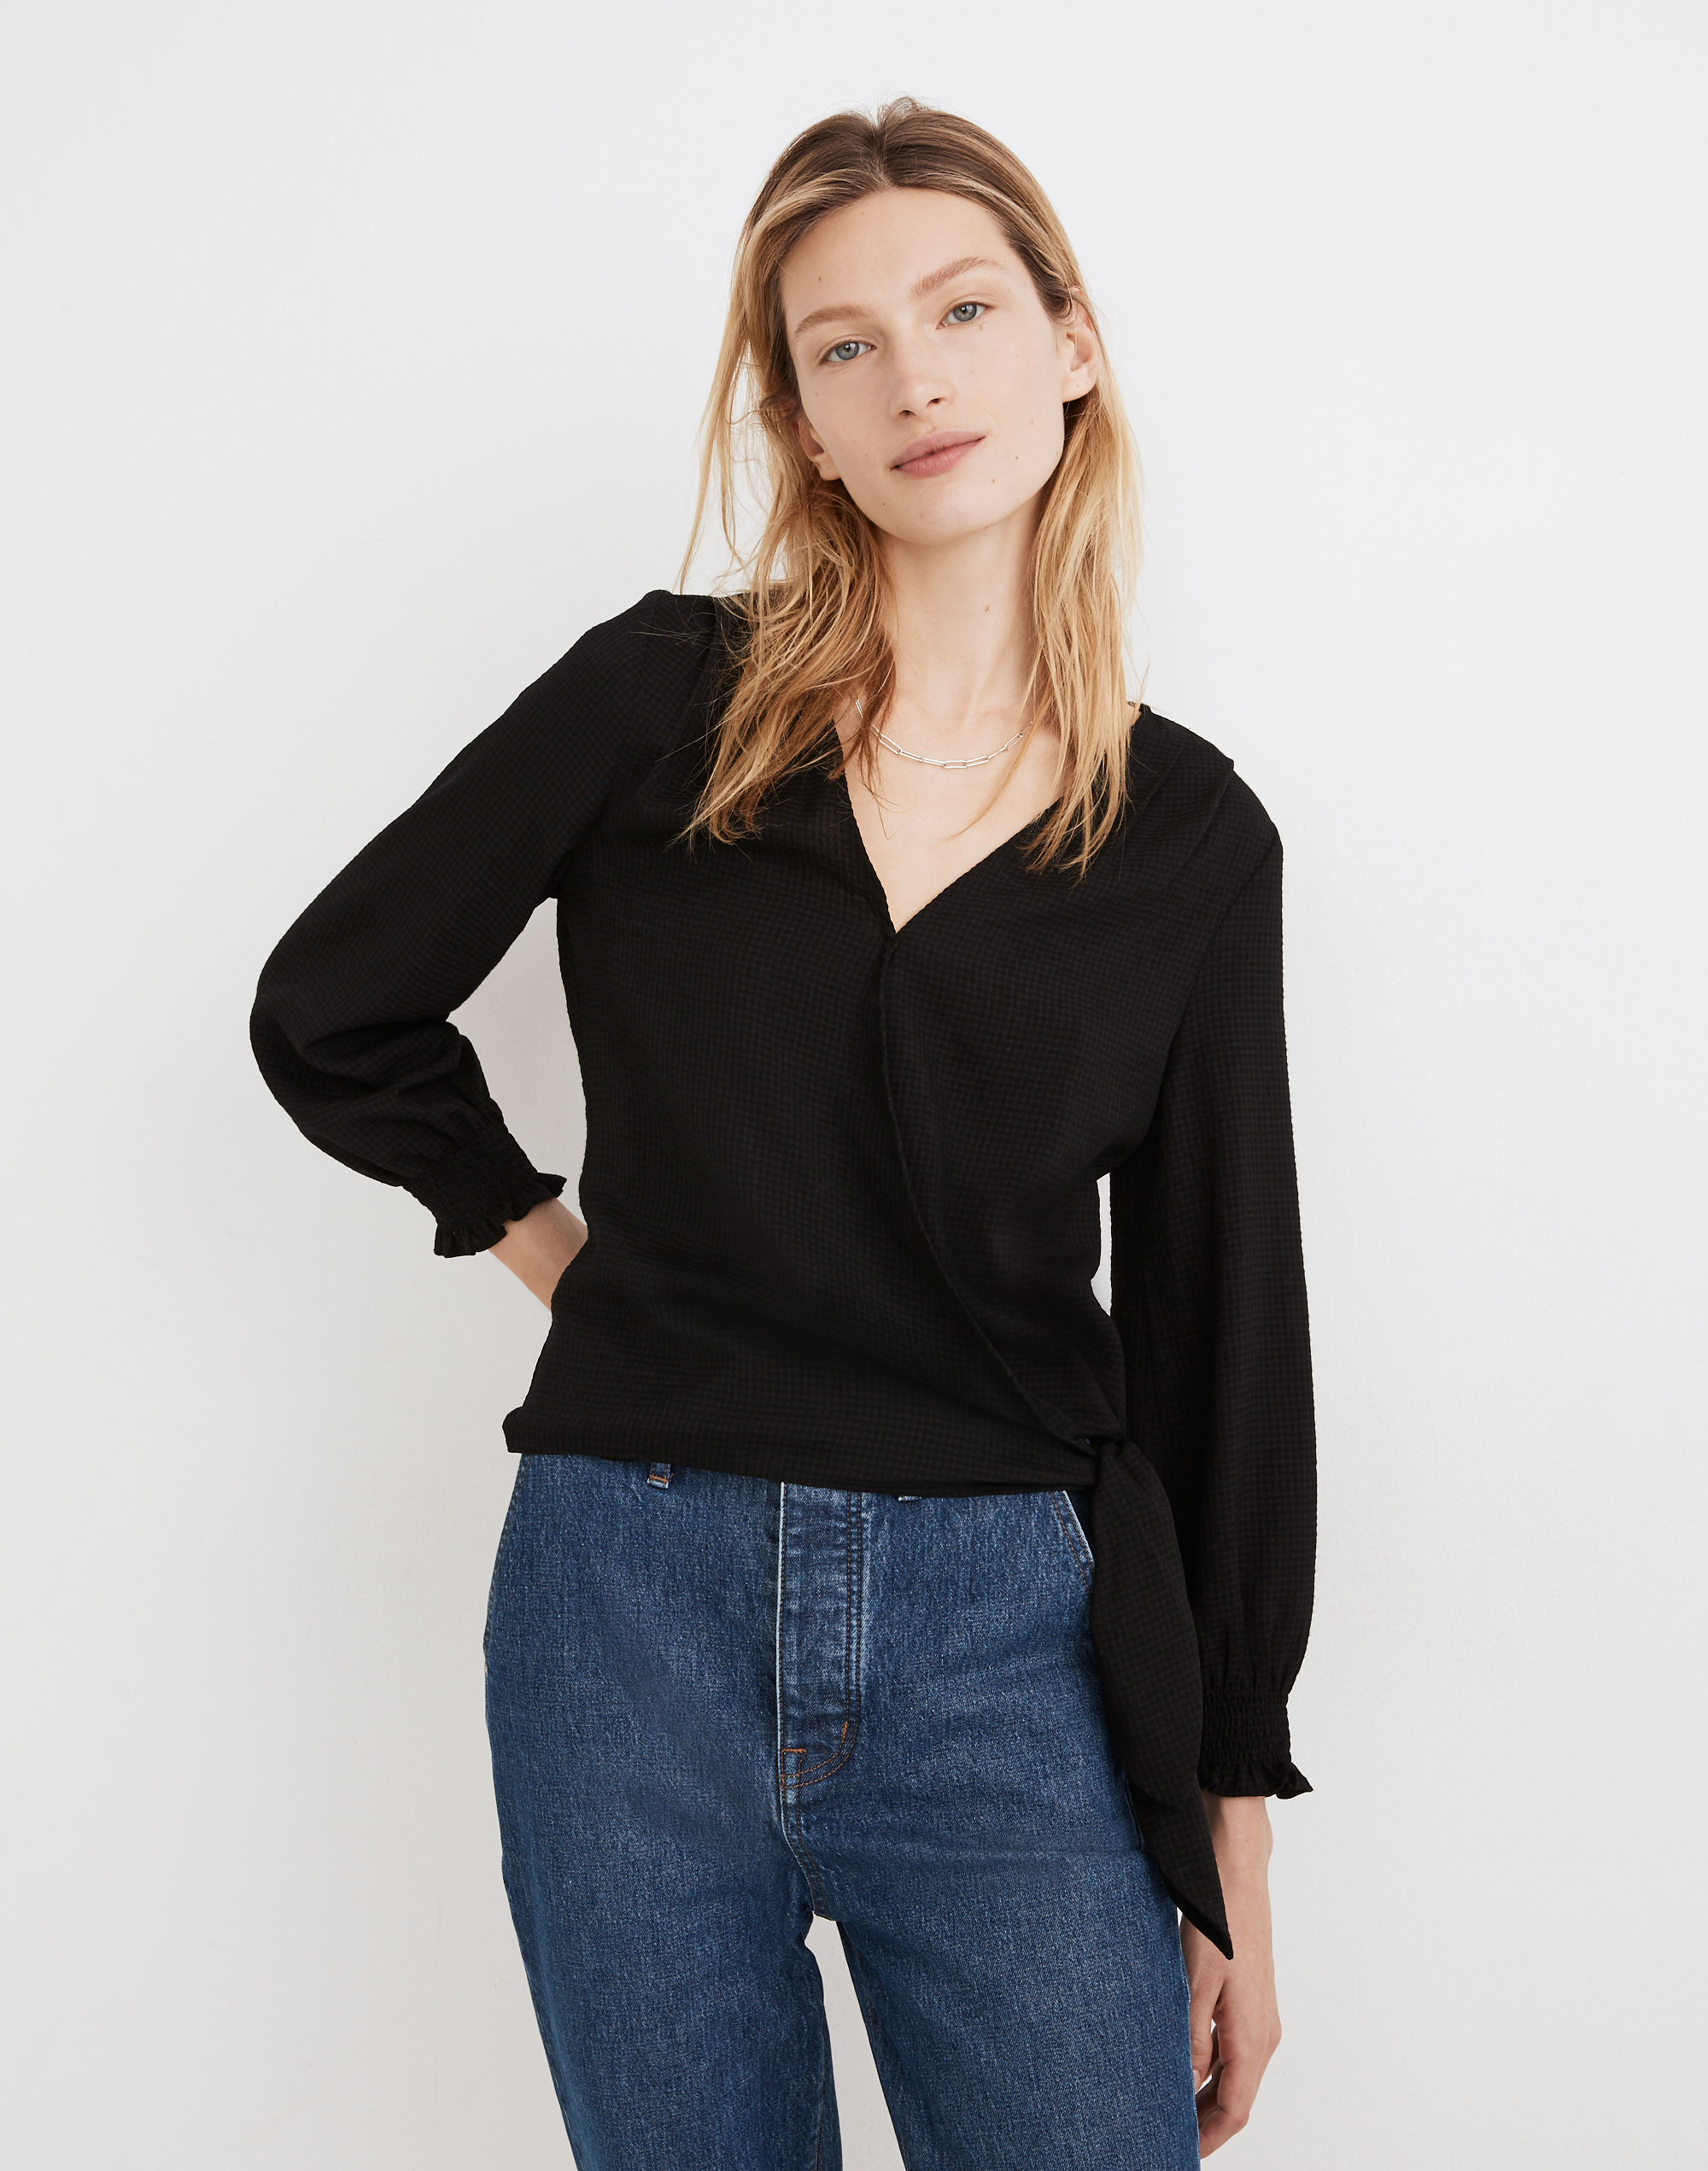 By Anthropologie Seamless Long-Sleeve Snap-Front Crop Top